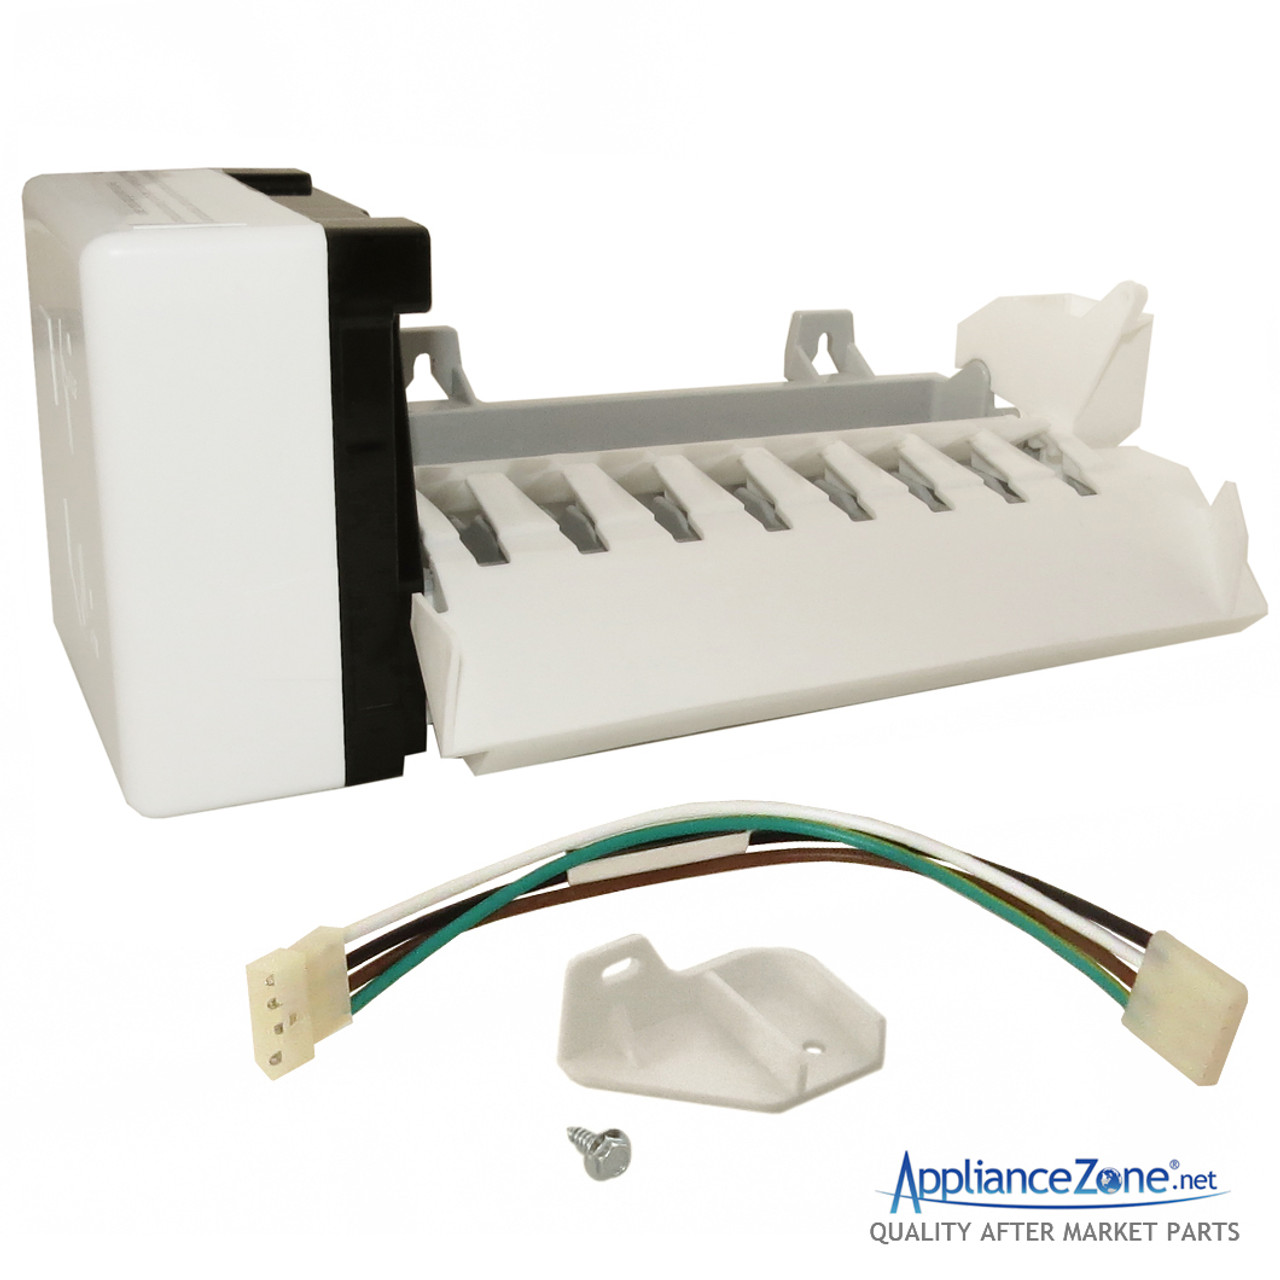 Replacement 2198597 Refrigerator Ice Maker for Whirlpool / KitchenAid ...